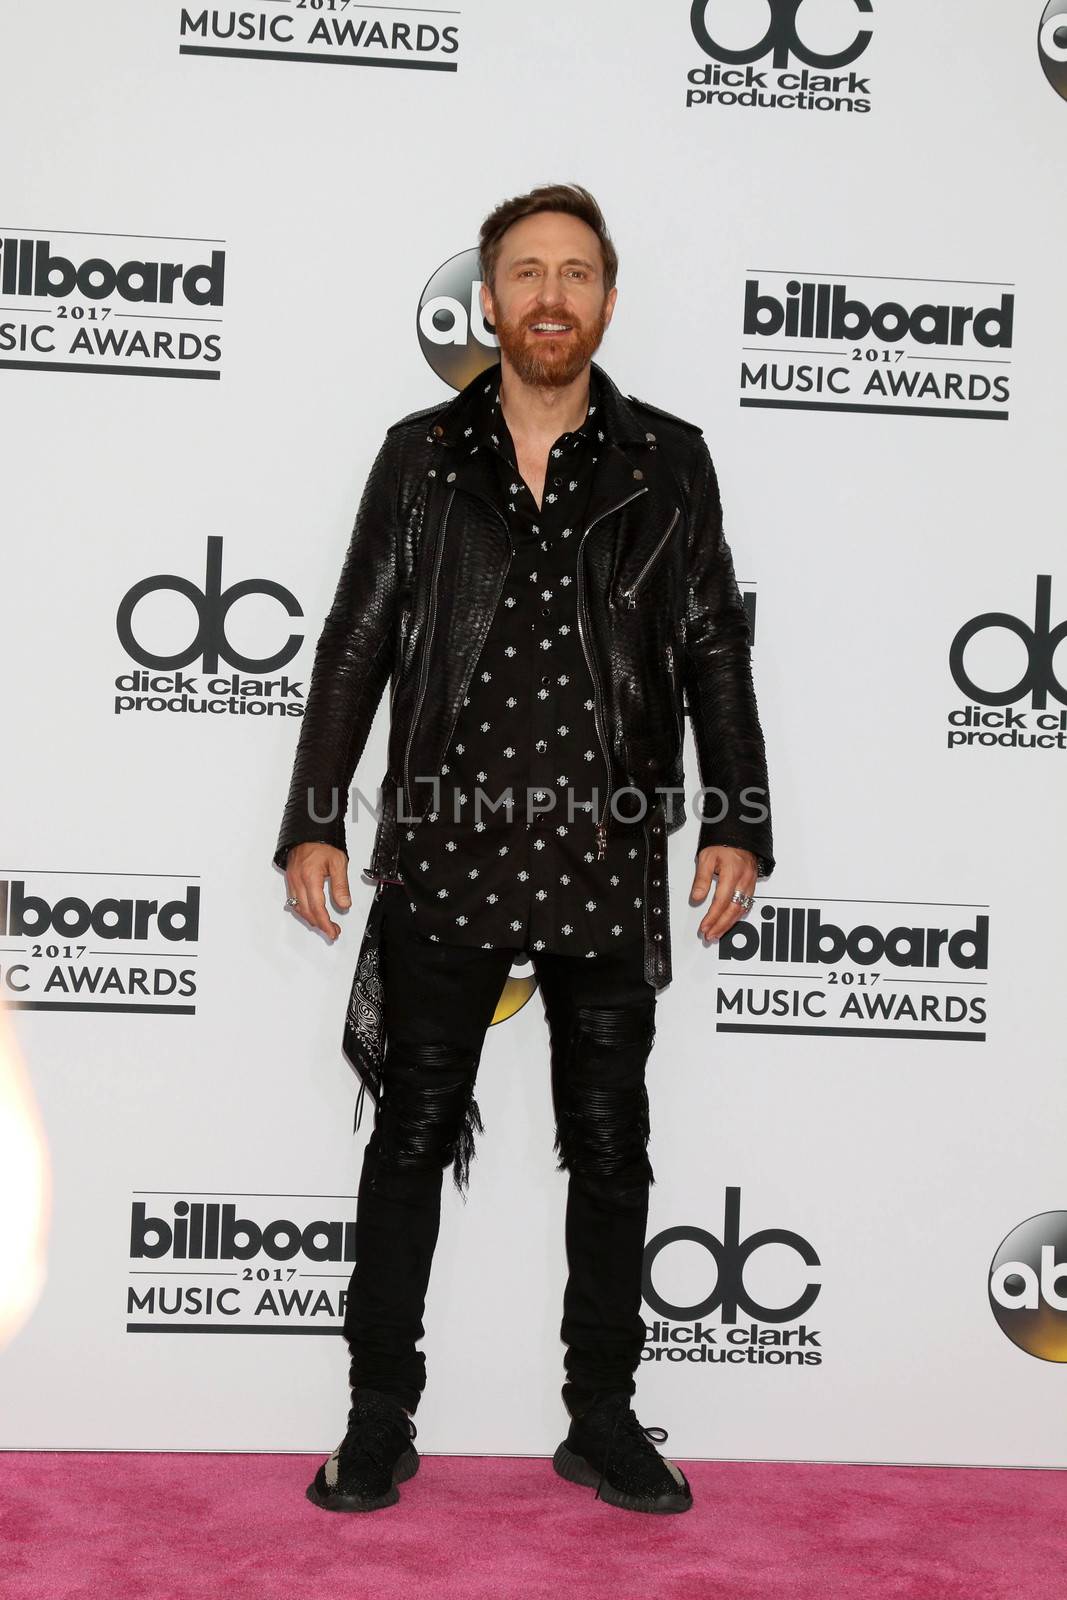 David Guetta
at the 2017 Billboard Awards Press Room, T-Mobile Arena, Las Vegas, NV 05-21-17/ImageCollect by ImageCollect